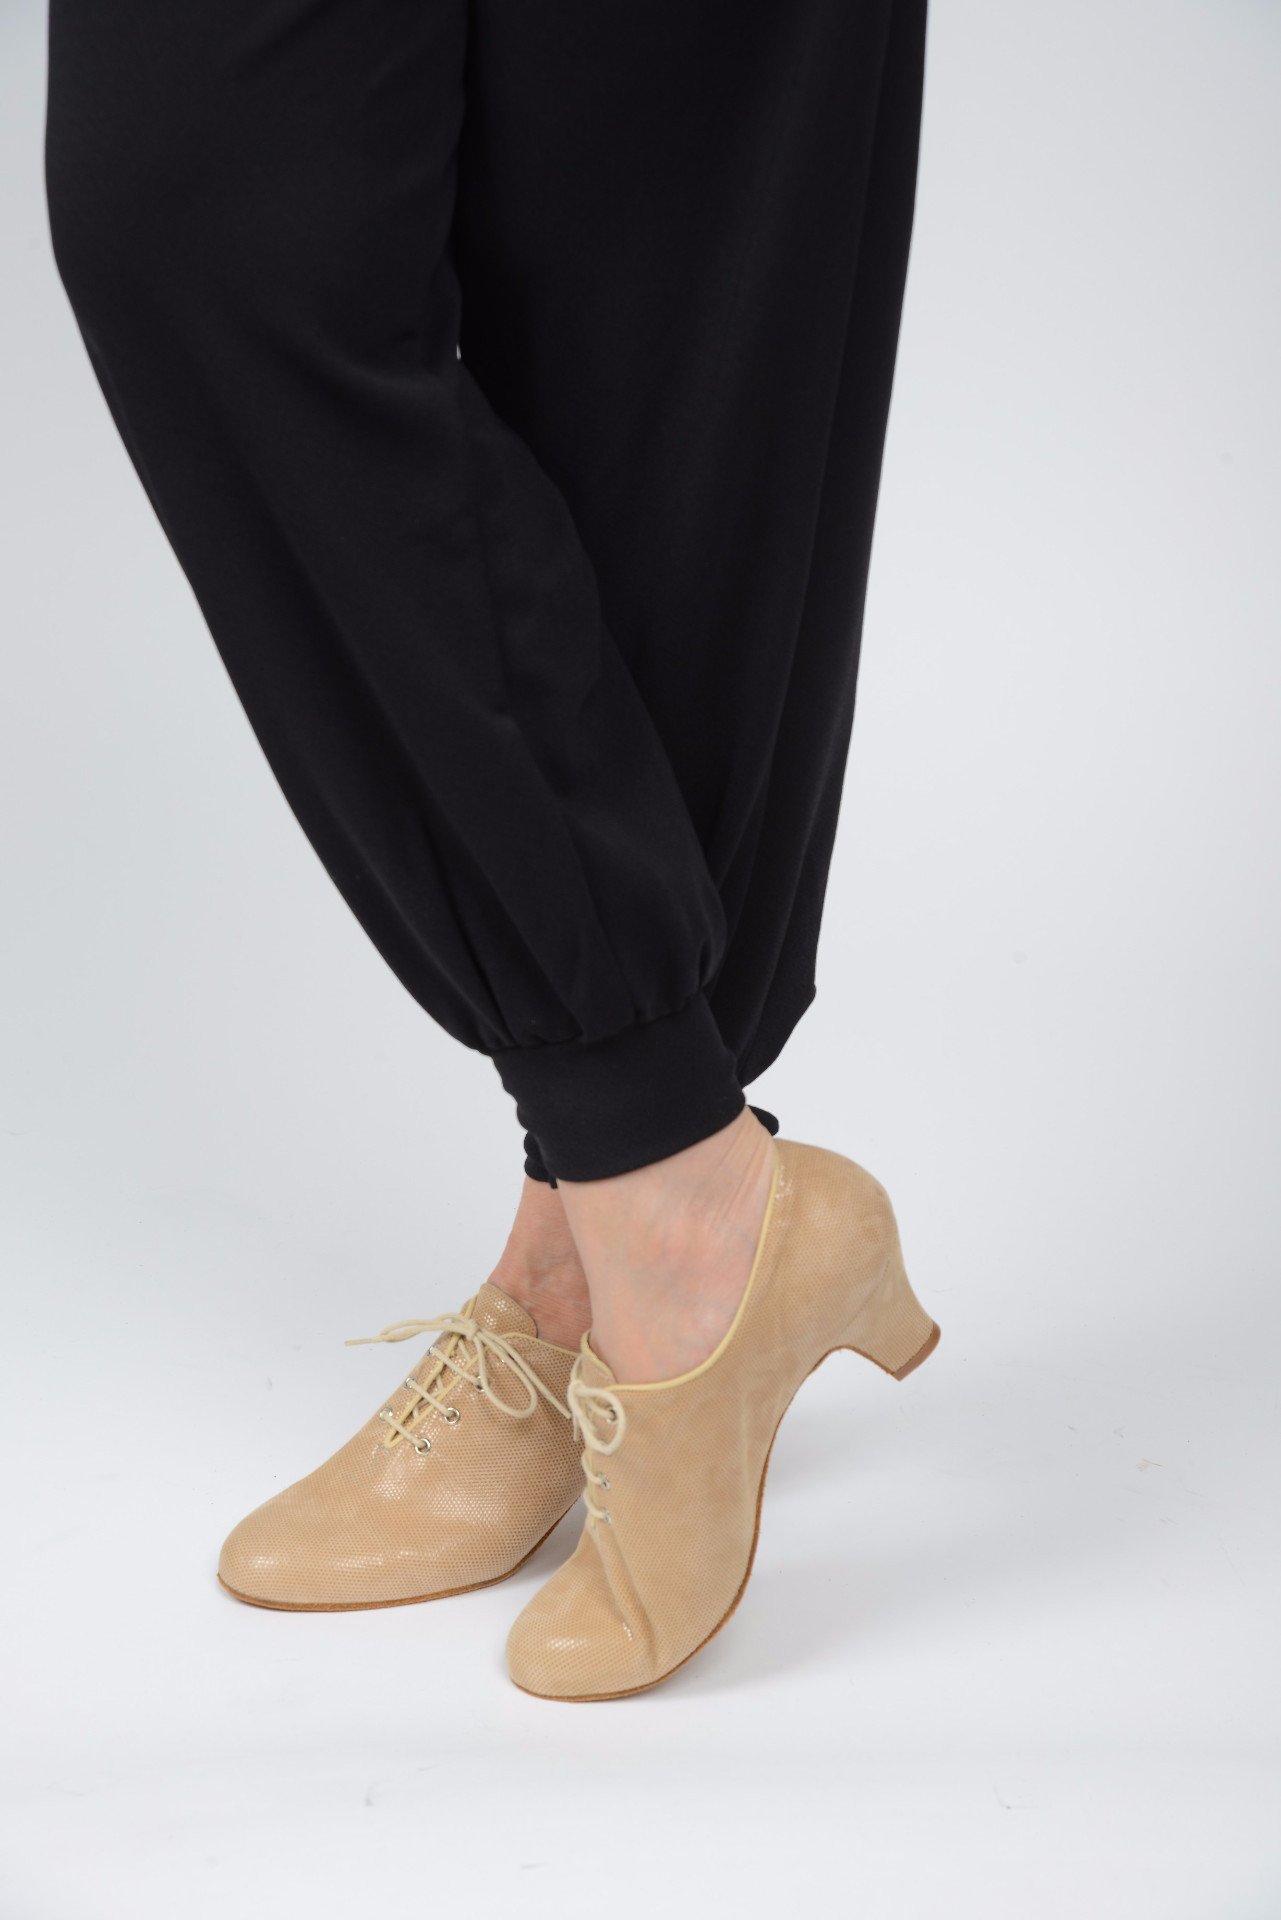 Italian Tango Shoes: Trainers - Beige Lame Leather by Paoul - Axis Tango